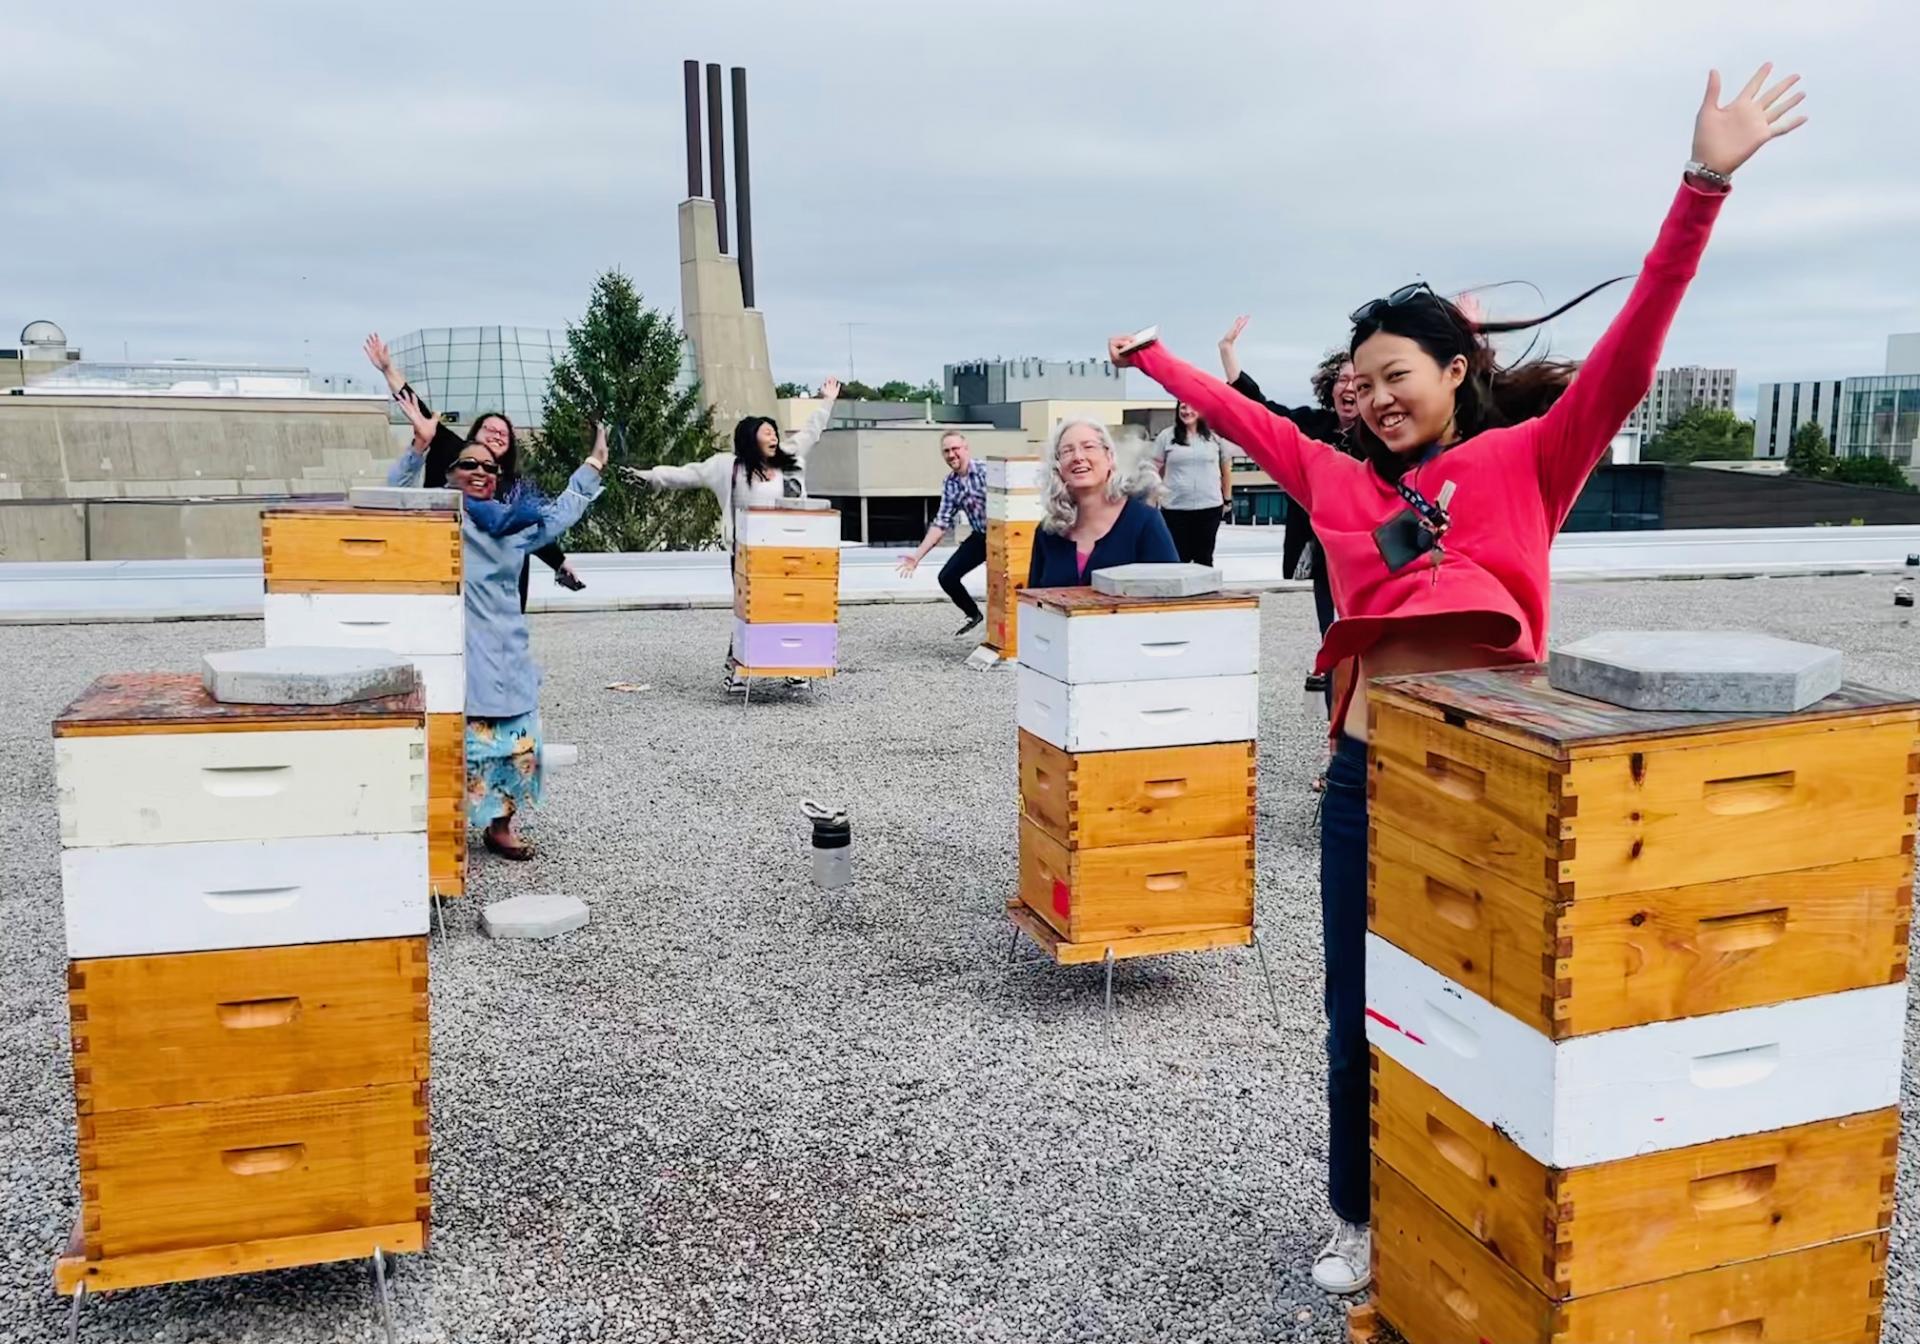 Members of Deans Administrative Group jumping up from behind bee hives on the rooftop of the Kina Wiiya Enadong Building